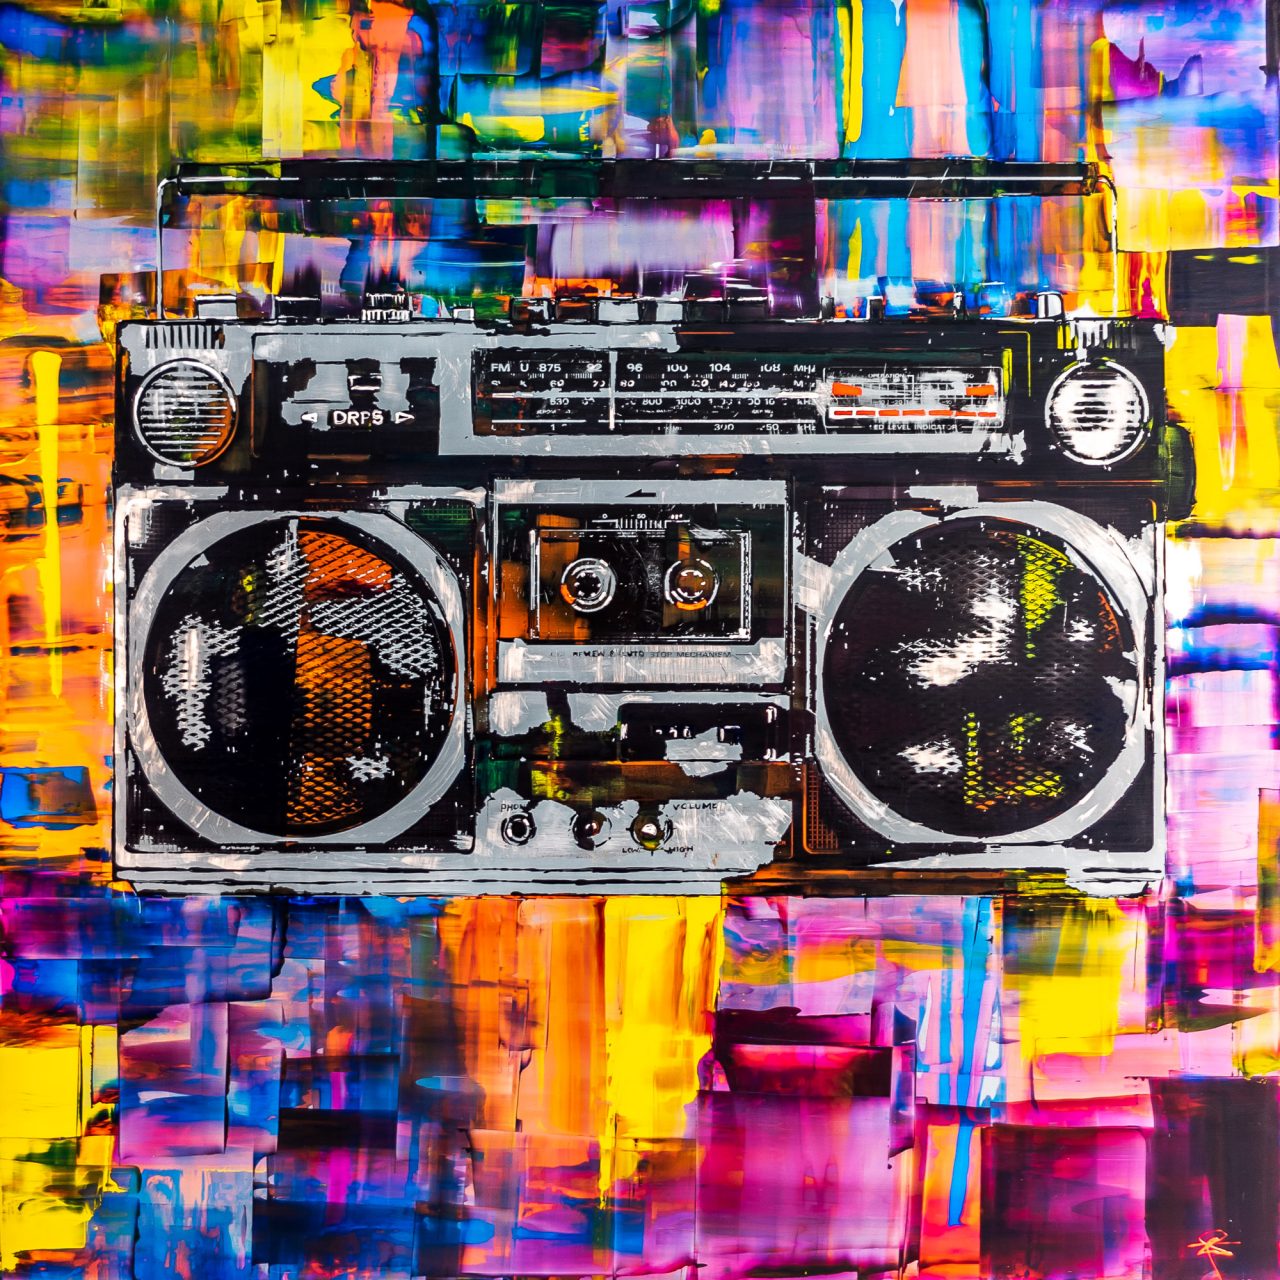 Ghettoblaster by Paul Kenton, UK contemporary artist, an original painting from his Retro Collection